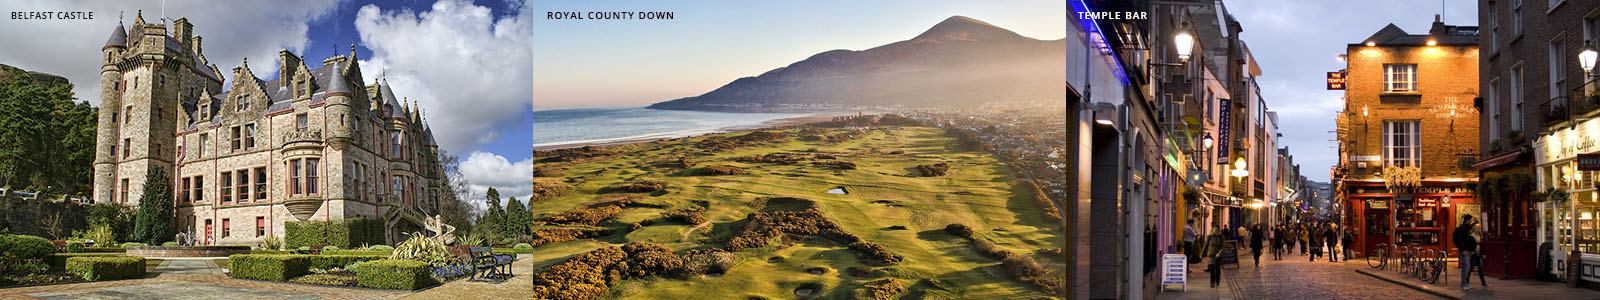 PerryGolf | The Best of Ireland by Land & Sea 2023/2024